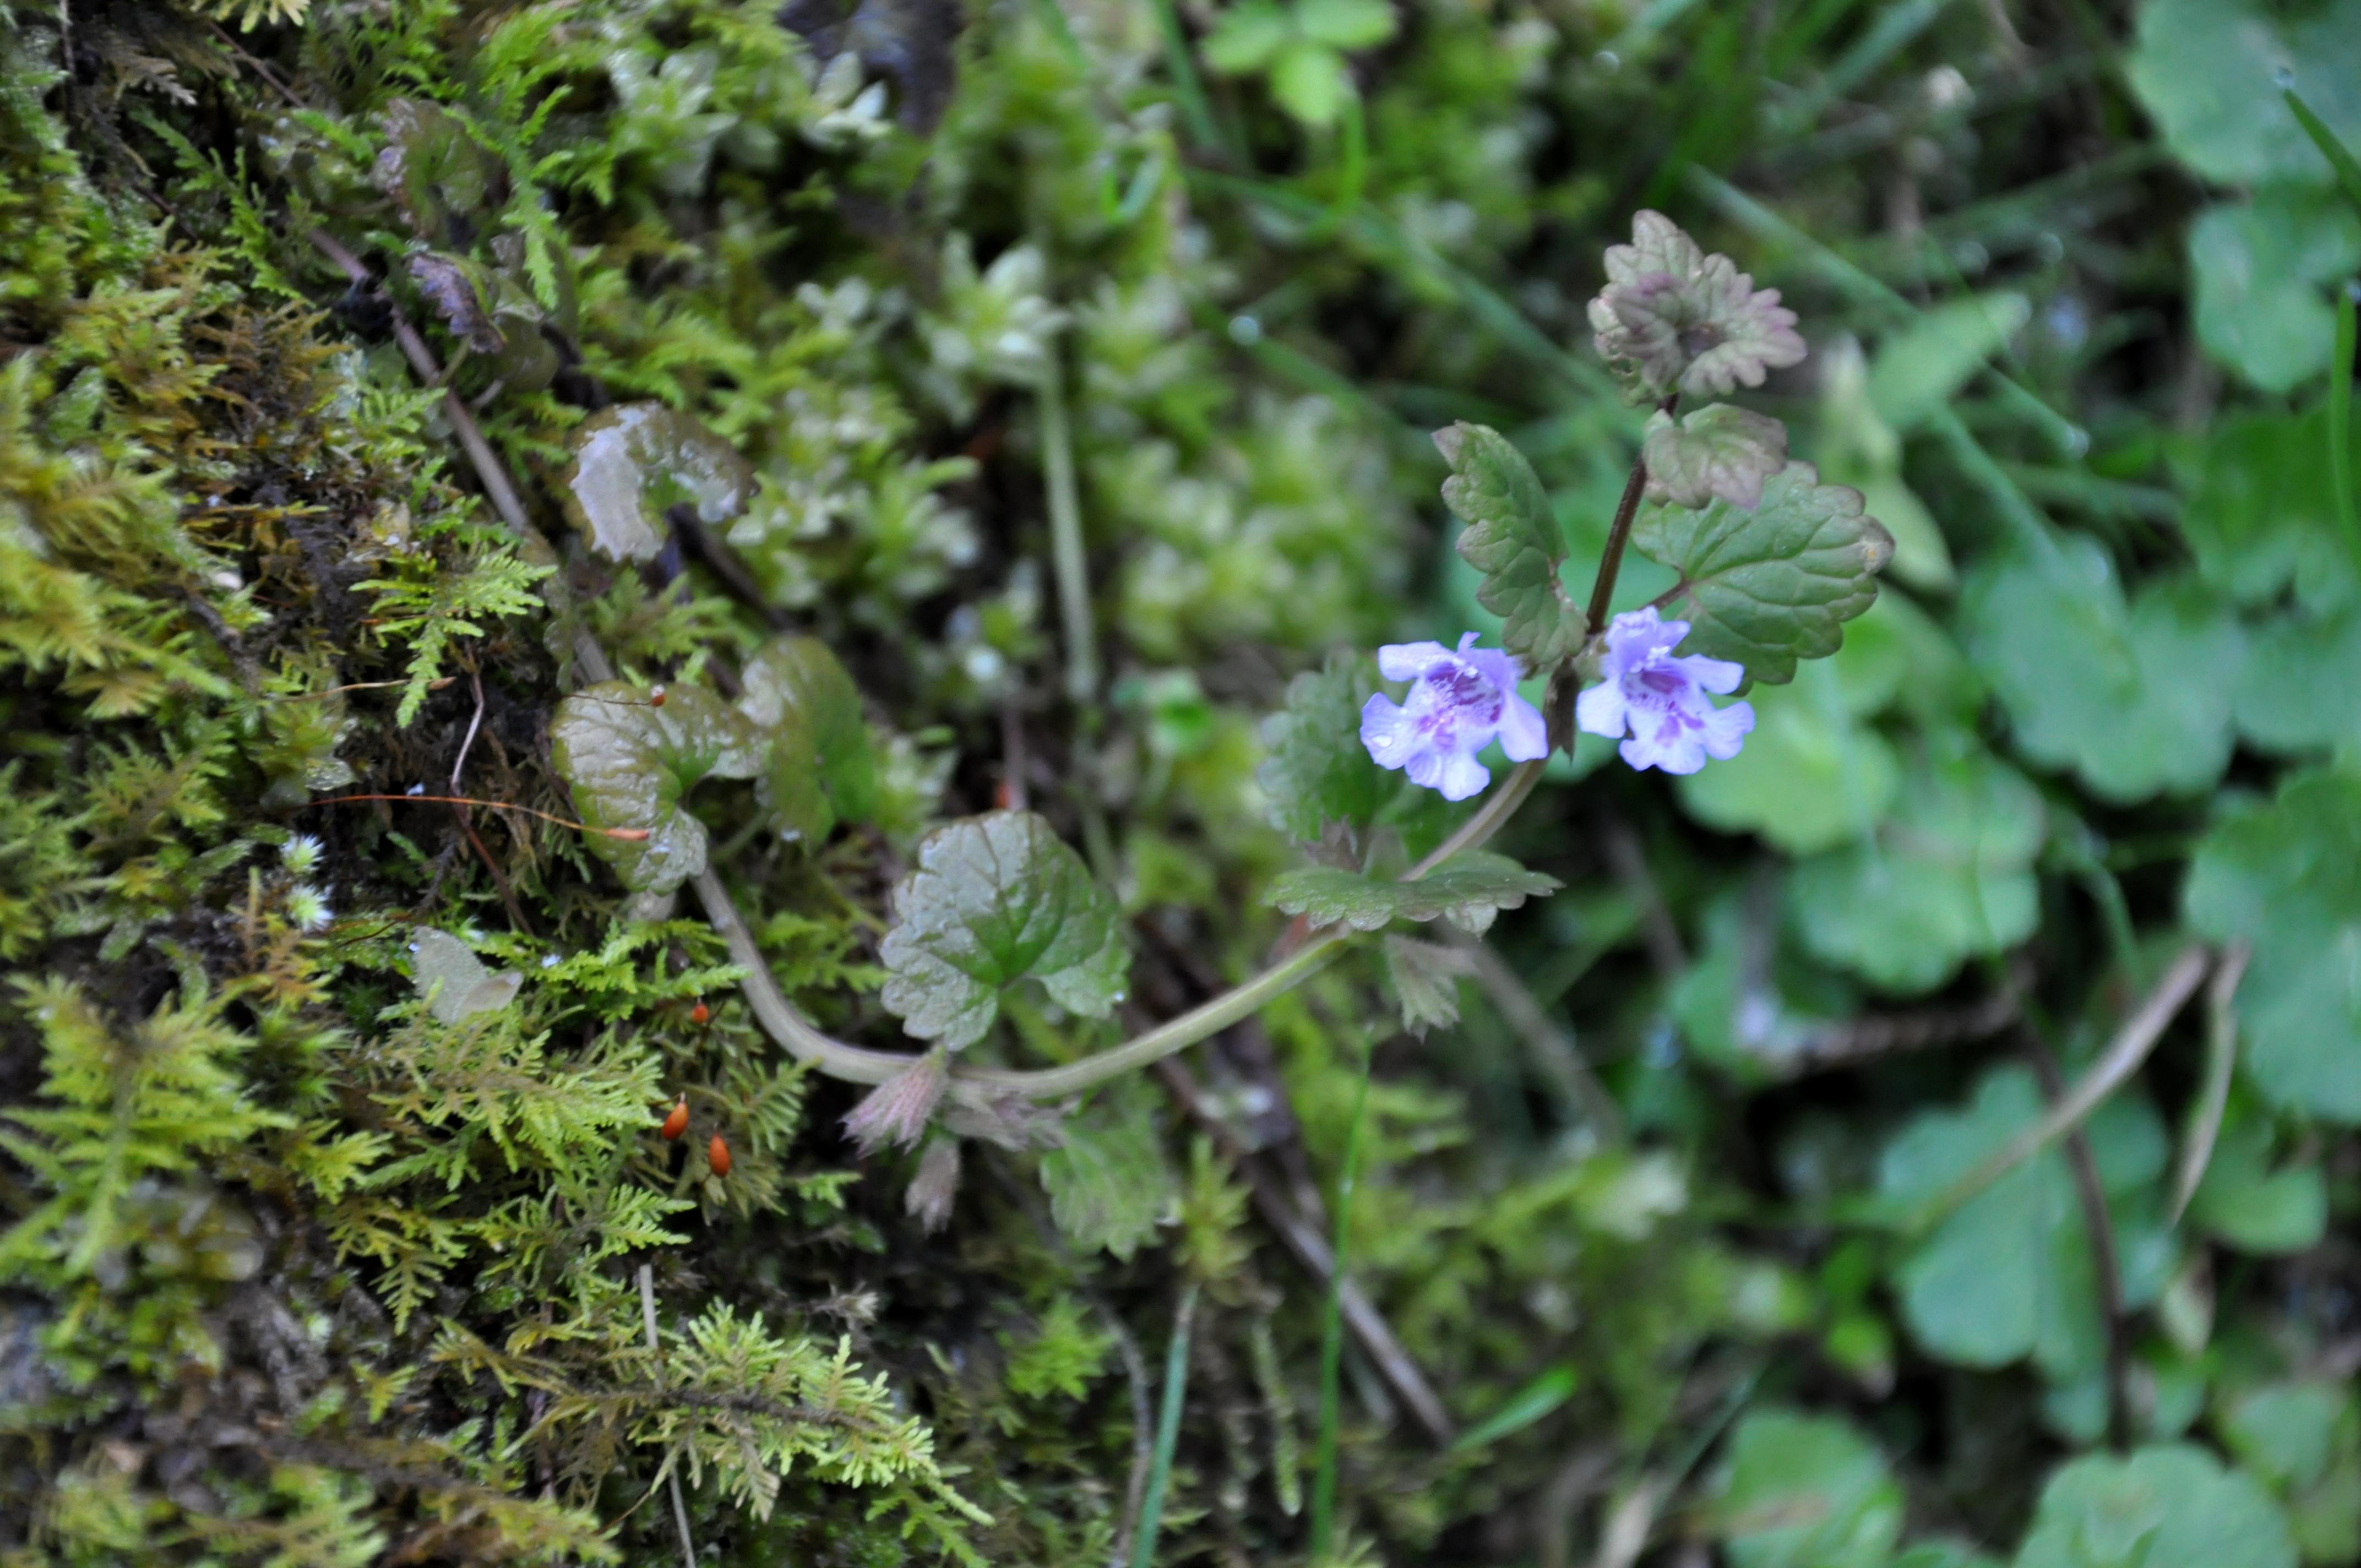 creeping charlie, or ground ivy